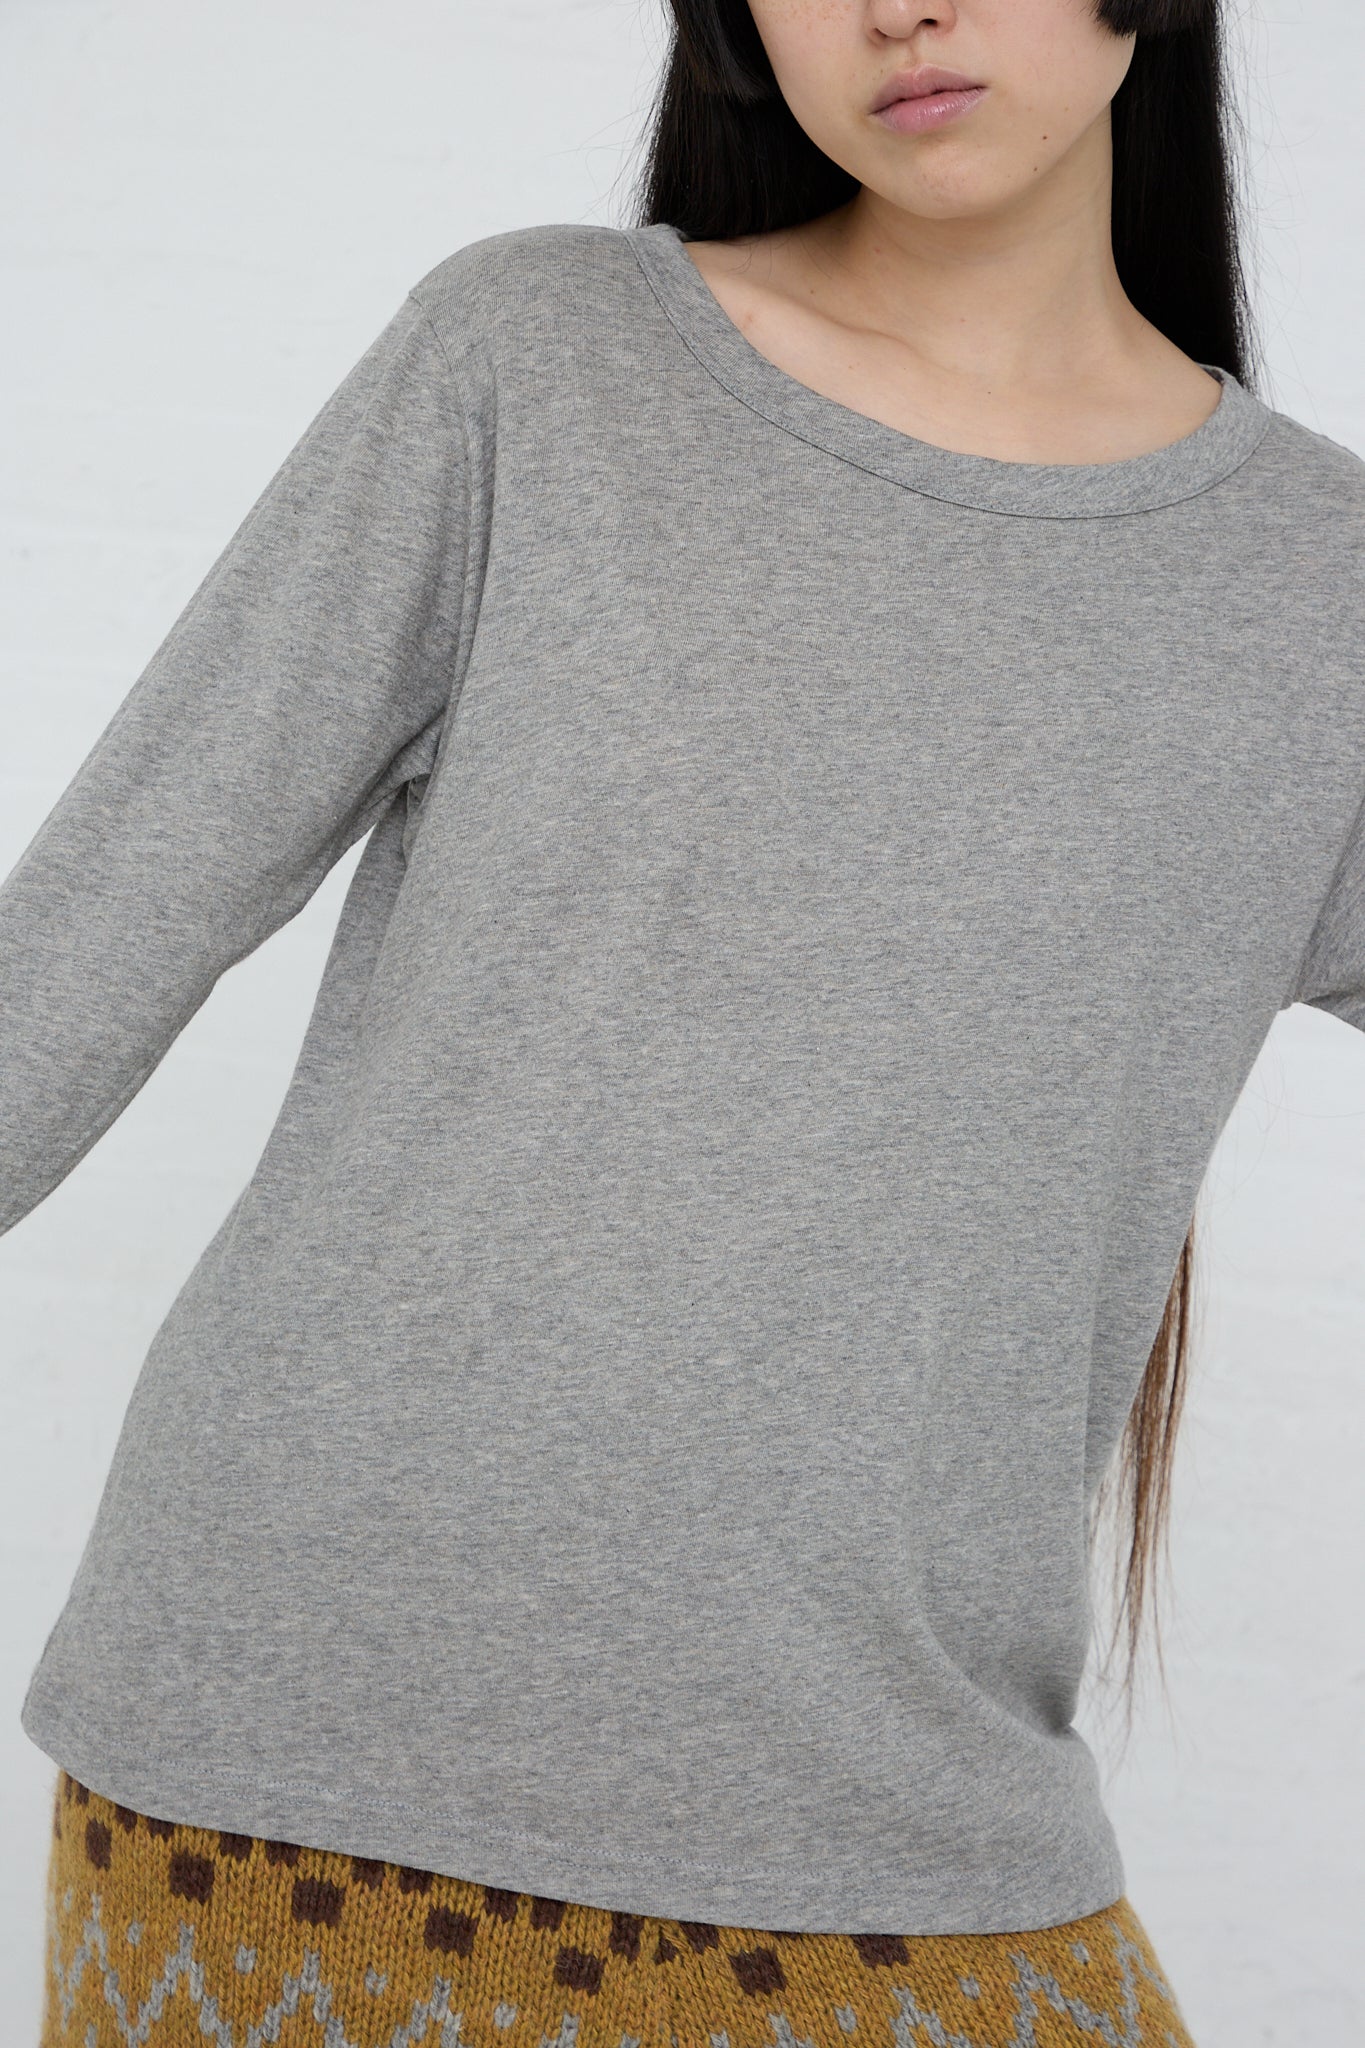 A model wearing an Ichi Cotton Knit Pullover in Gray. Front view.